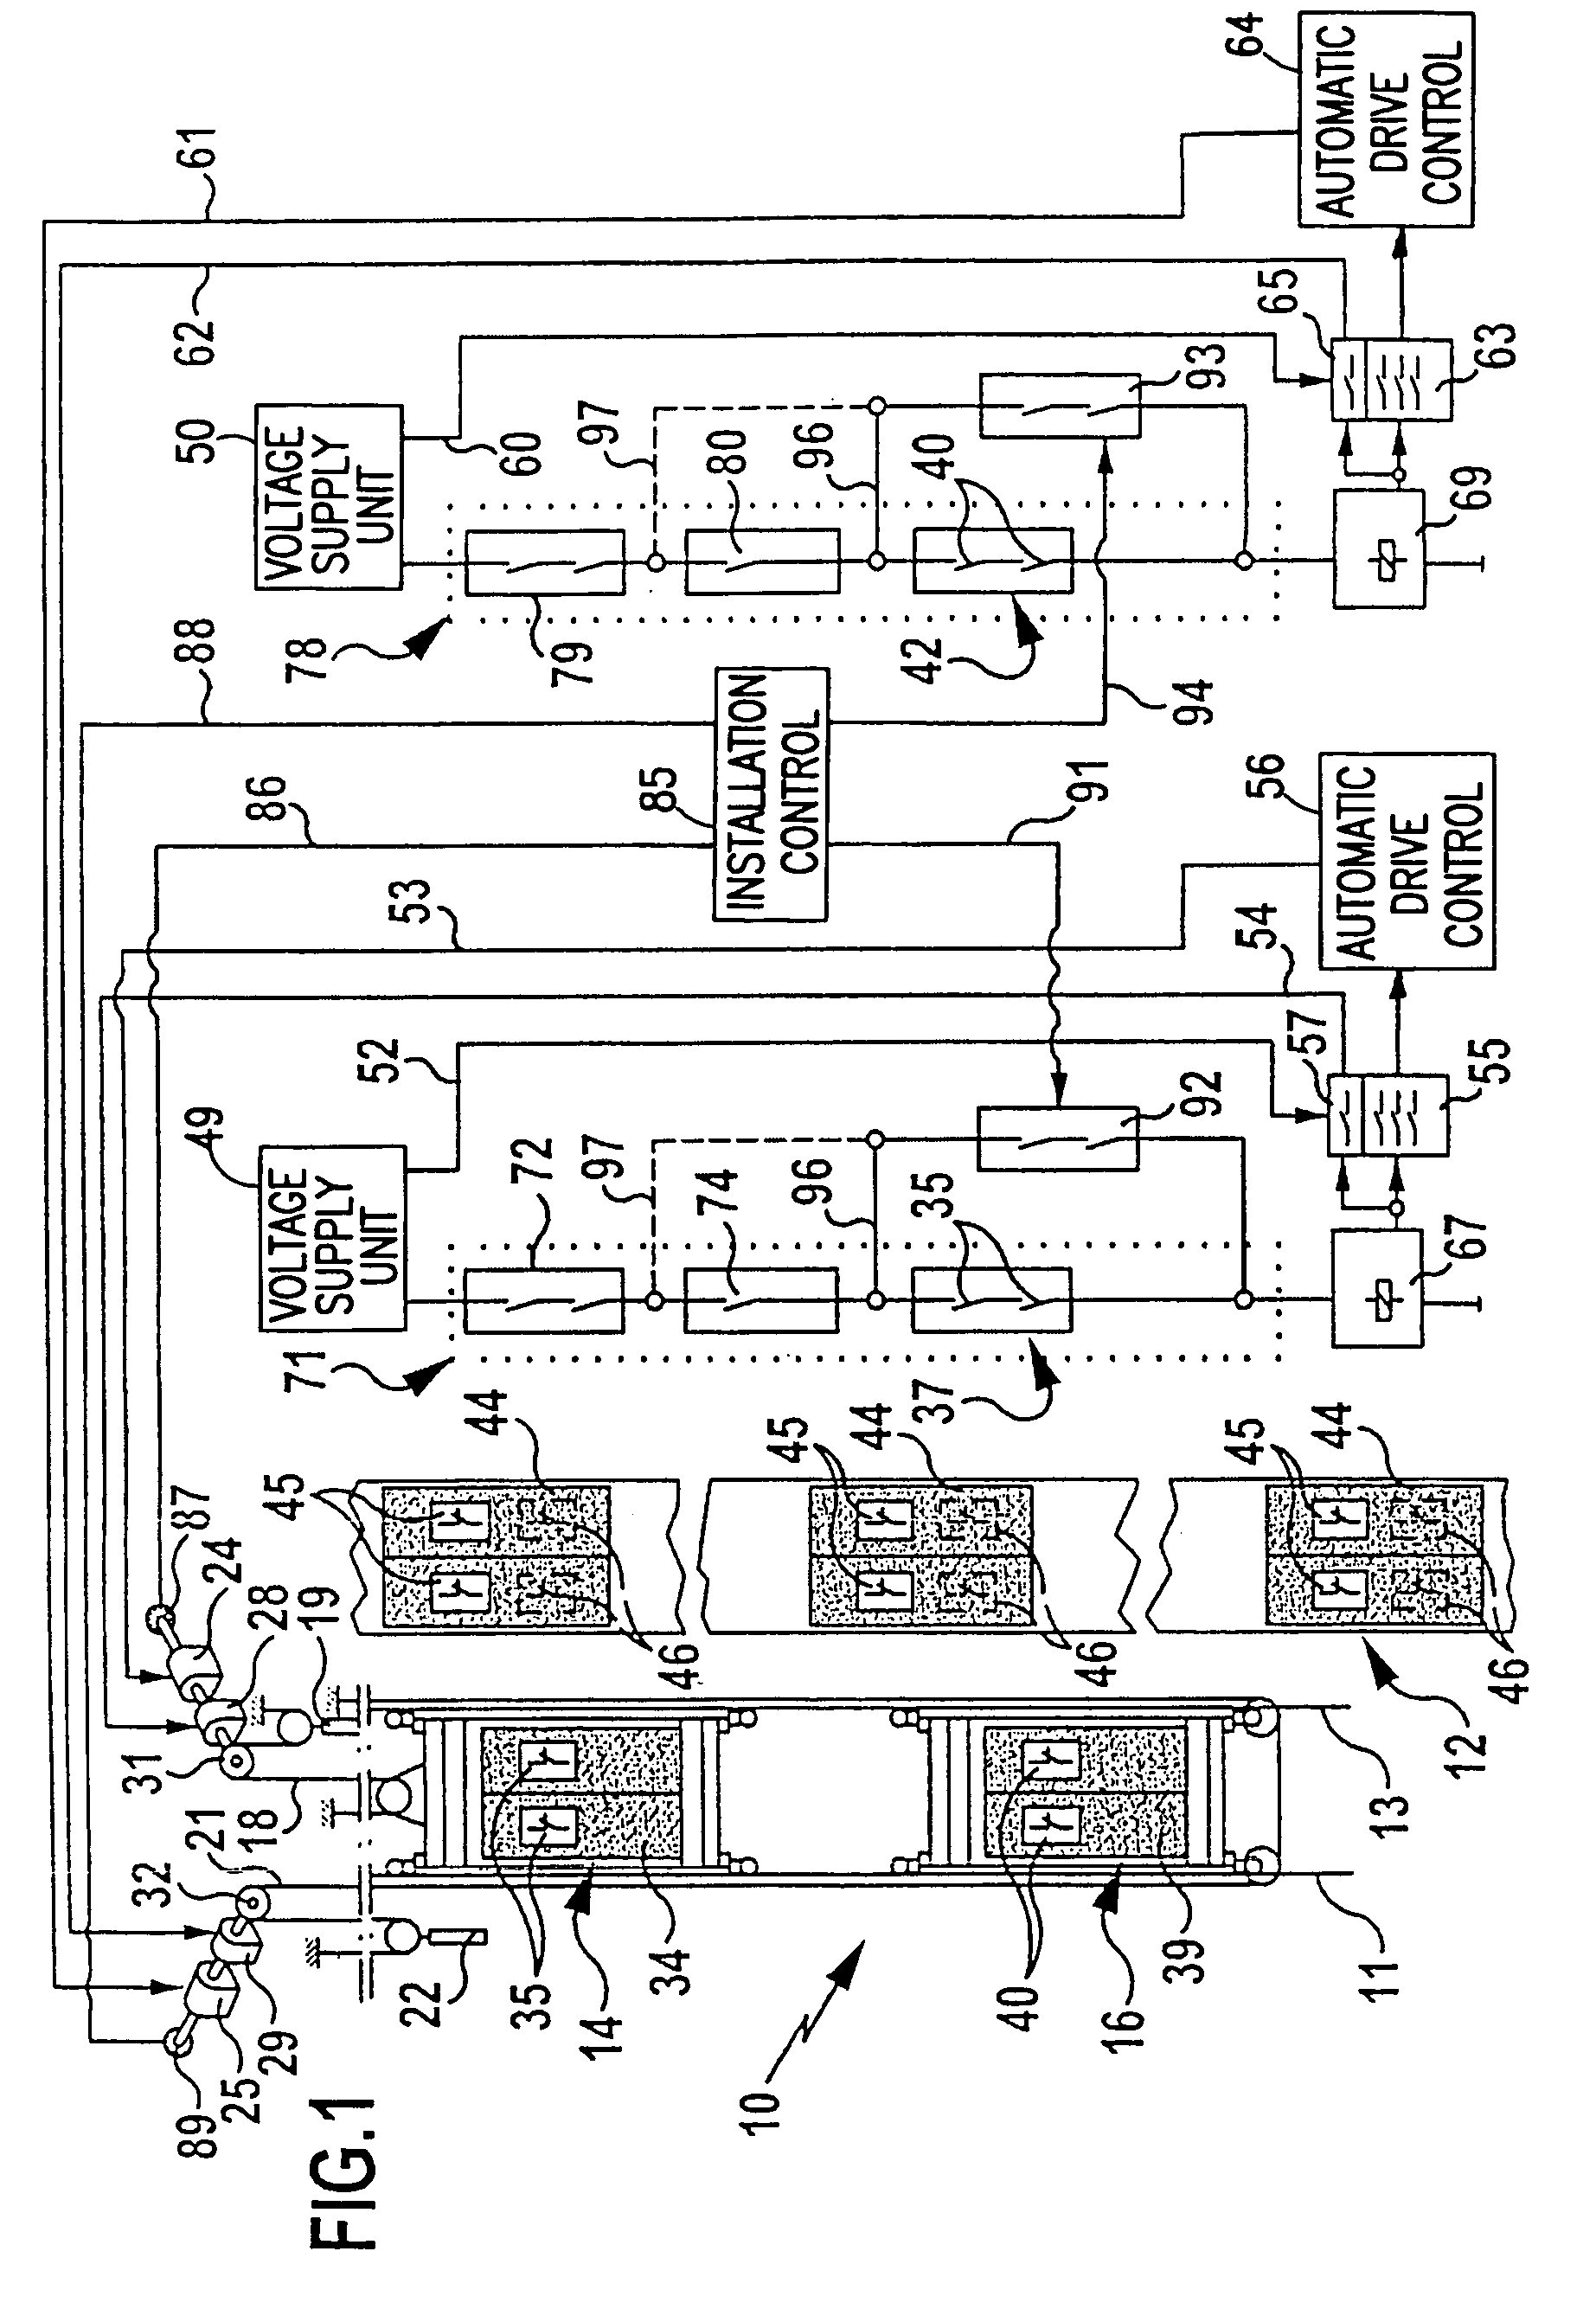 Elevator control having independent safety circuits